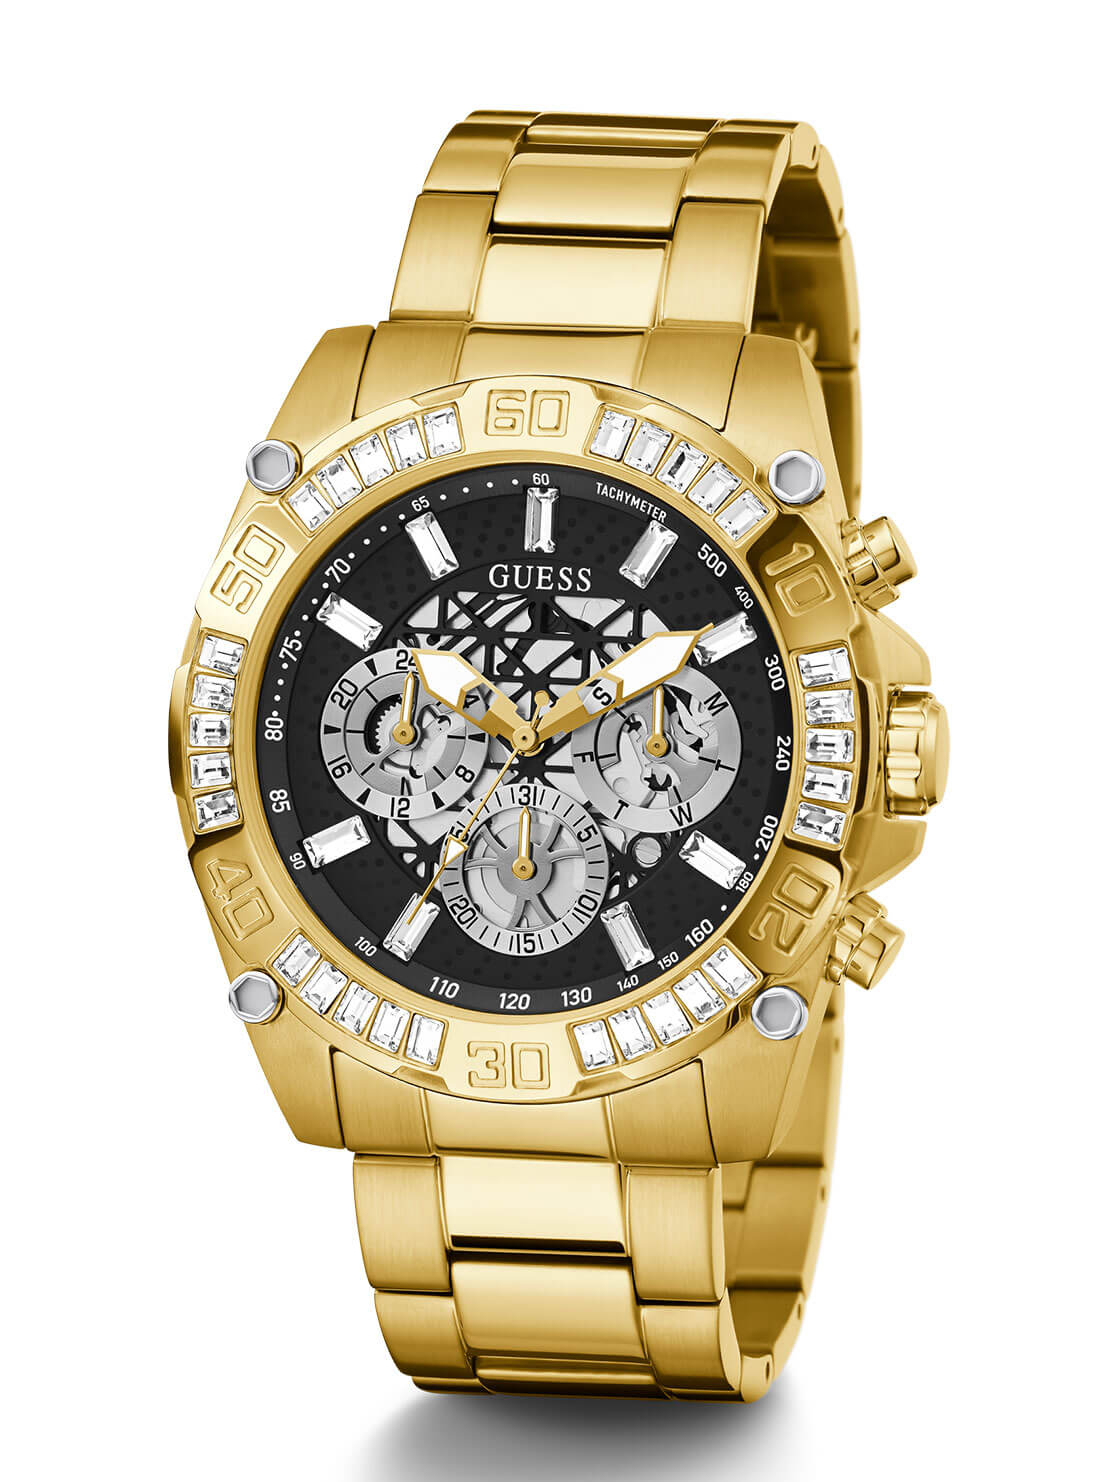 GUESS Mens Gold Trophy Watch GW0390G2 Front Angle View